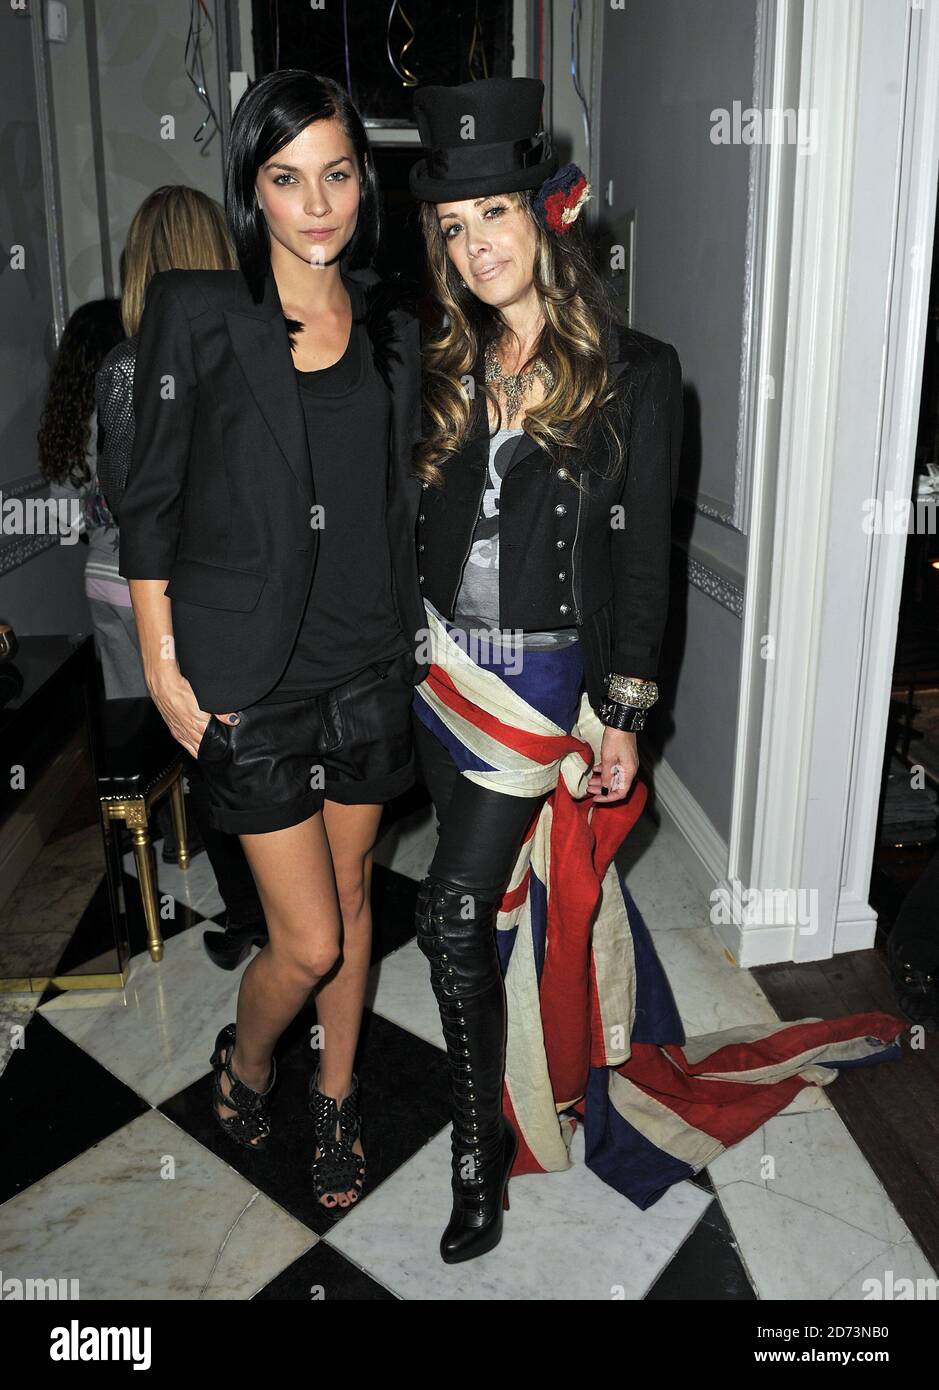 Leigh Lezark and Gela Nash-Taylor attending the launch party for Juicy Couture's flagship store in central London. Stock Photo